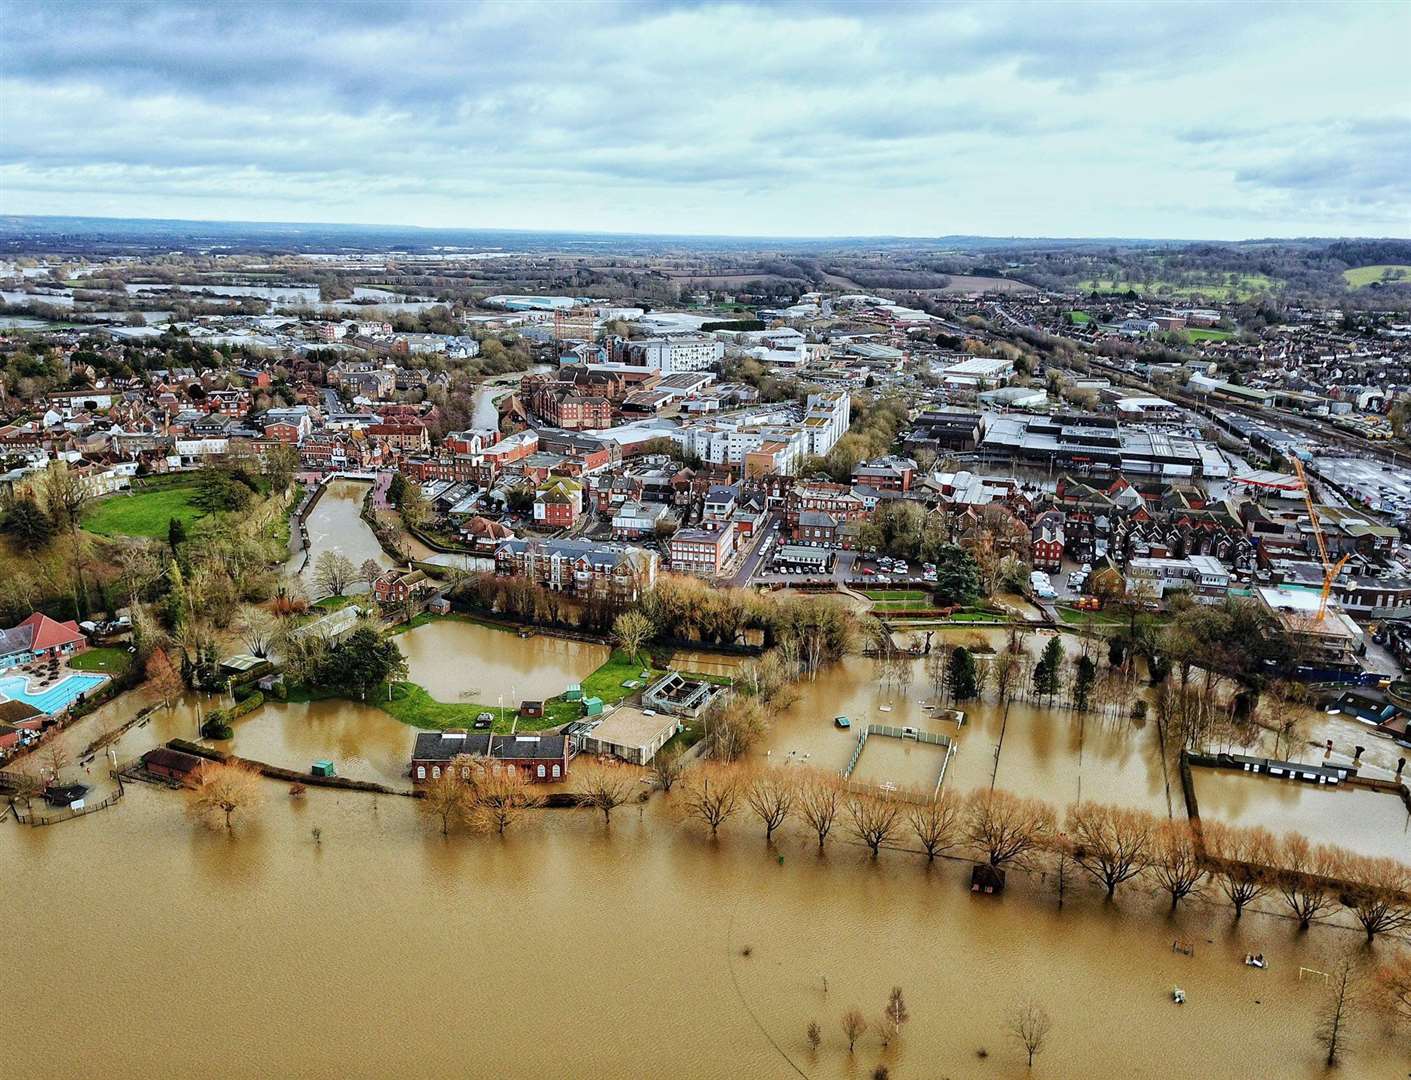 There was widespread flooding in Tonbridge in December 2019